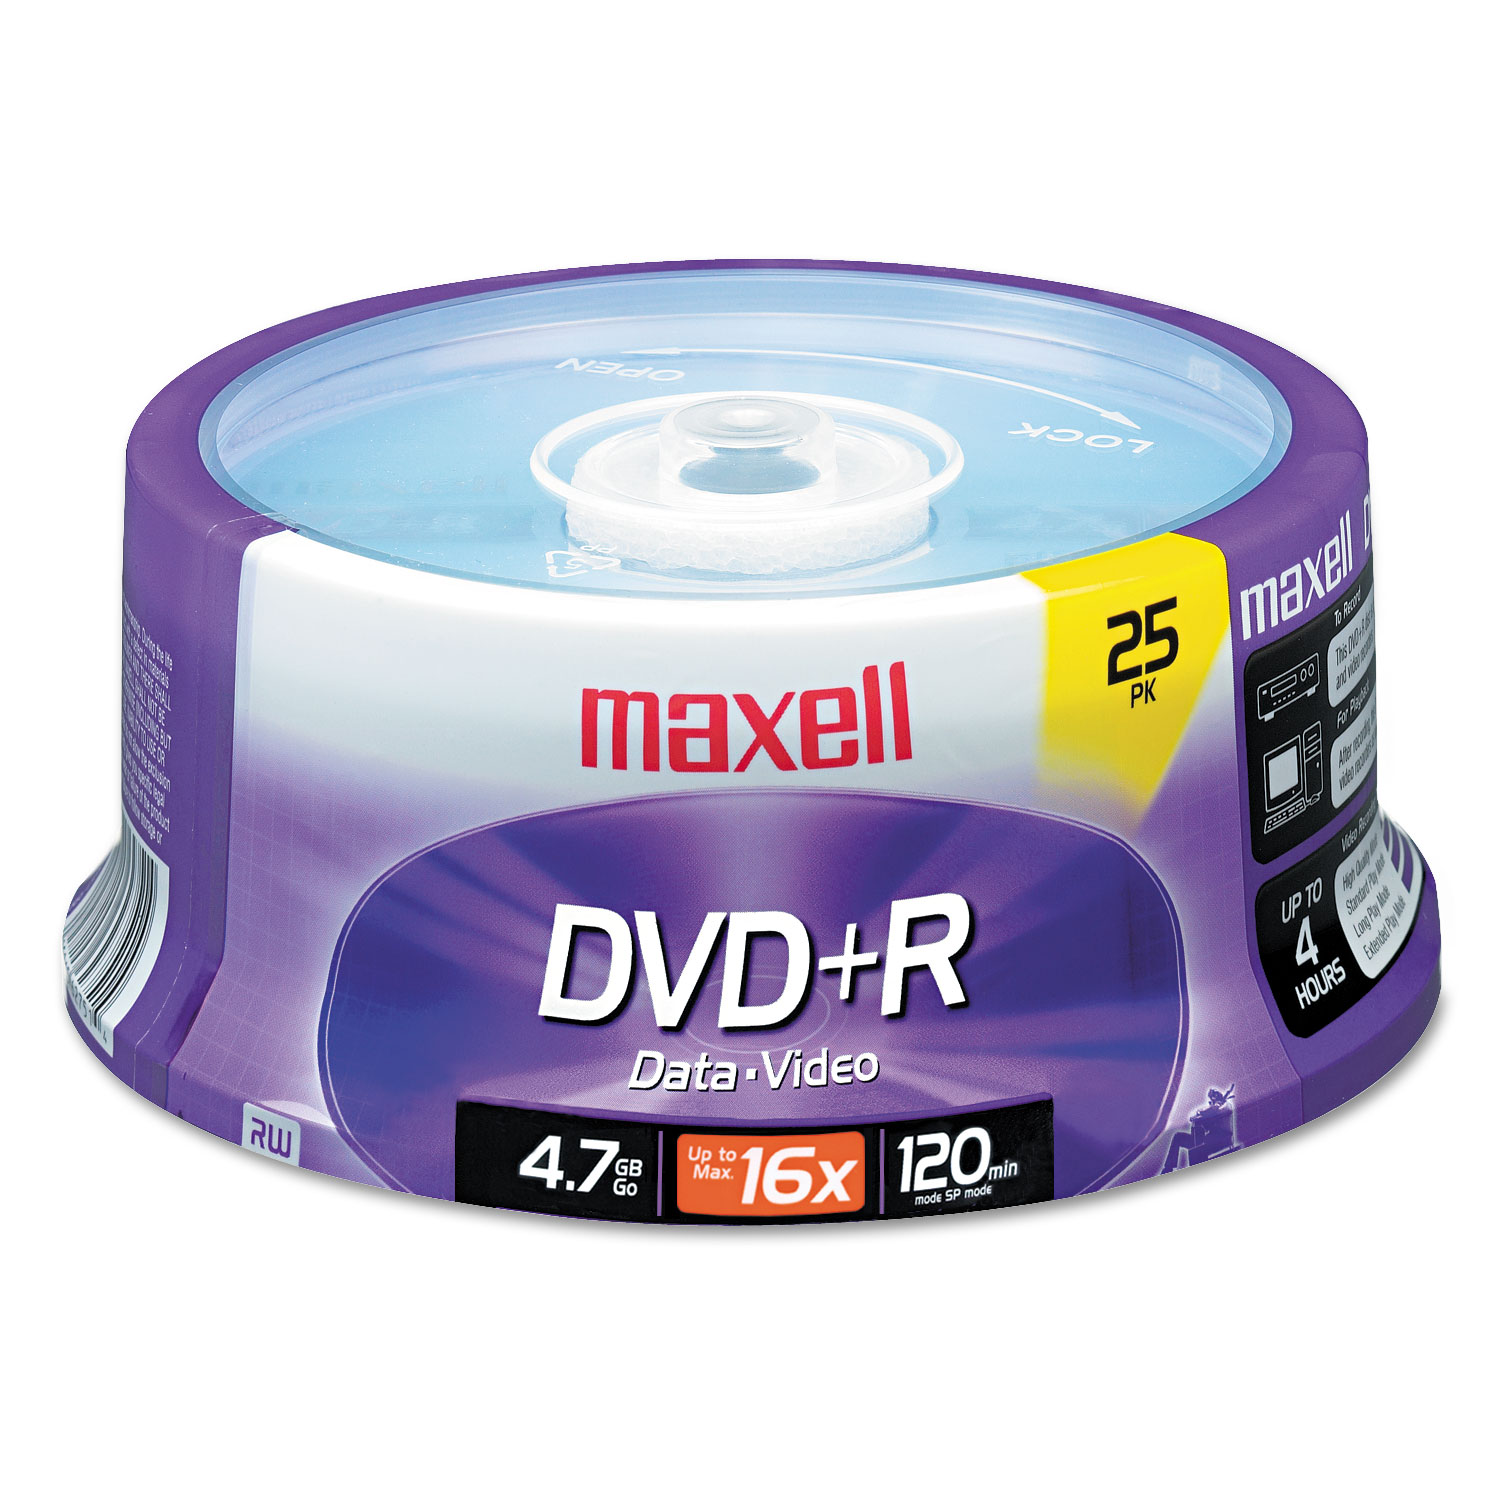  Maxell 639011 DVD+R Discs, 4.7GB, 16x, Spindle, Silver, 25/Pack (MAX639011) 